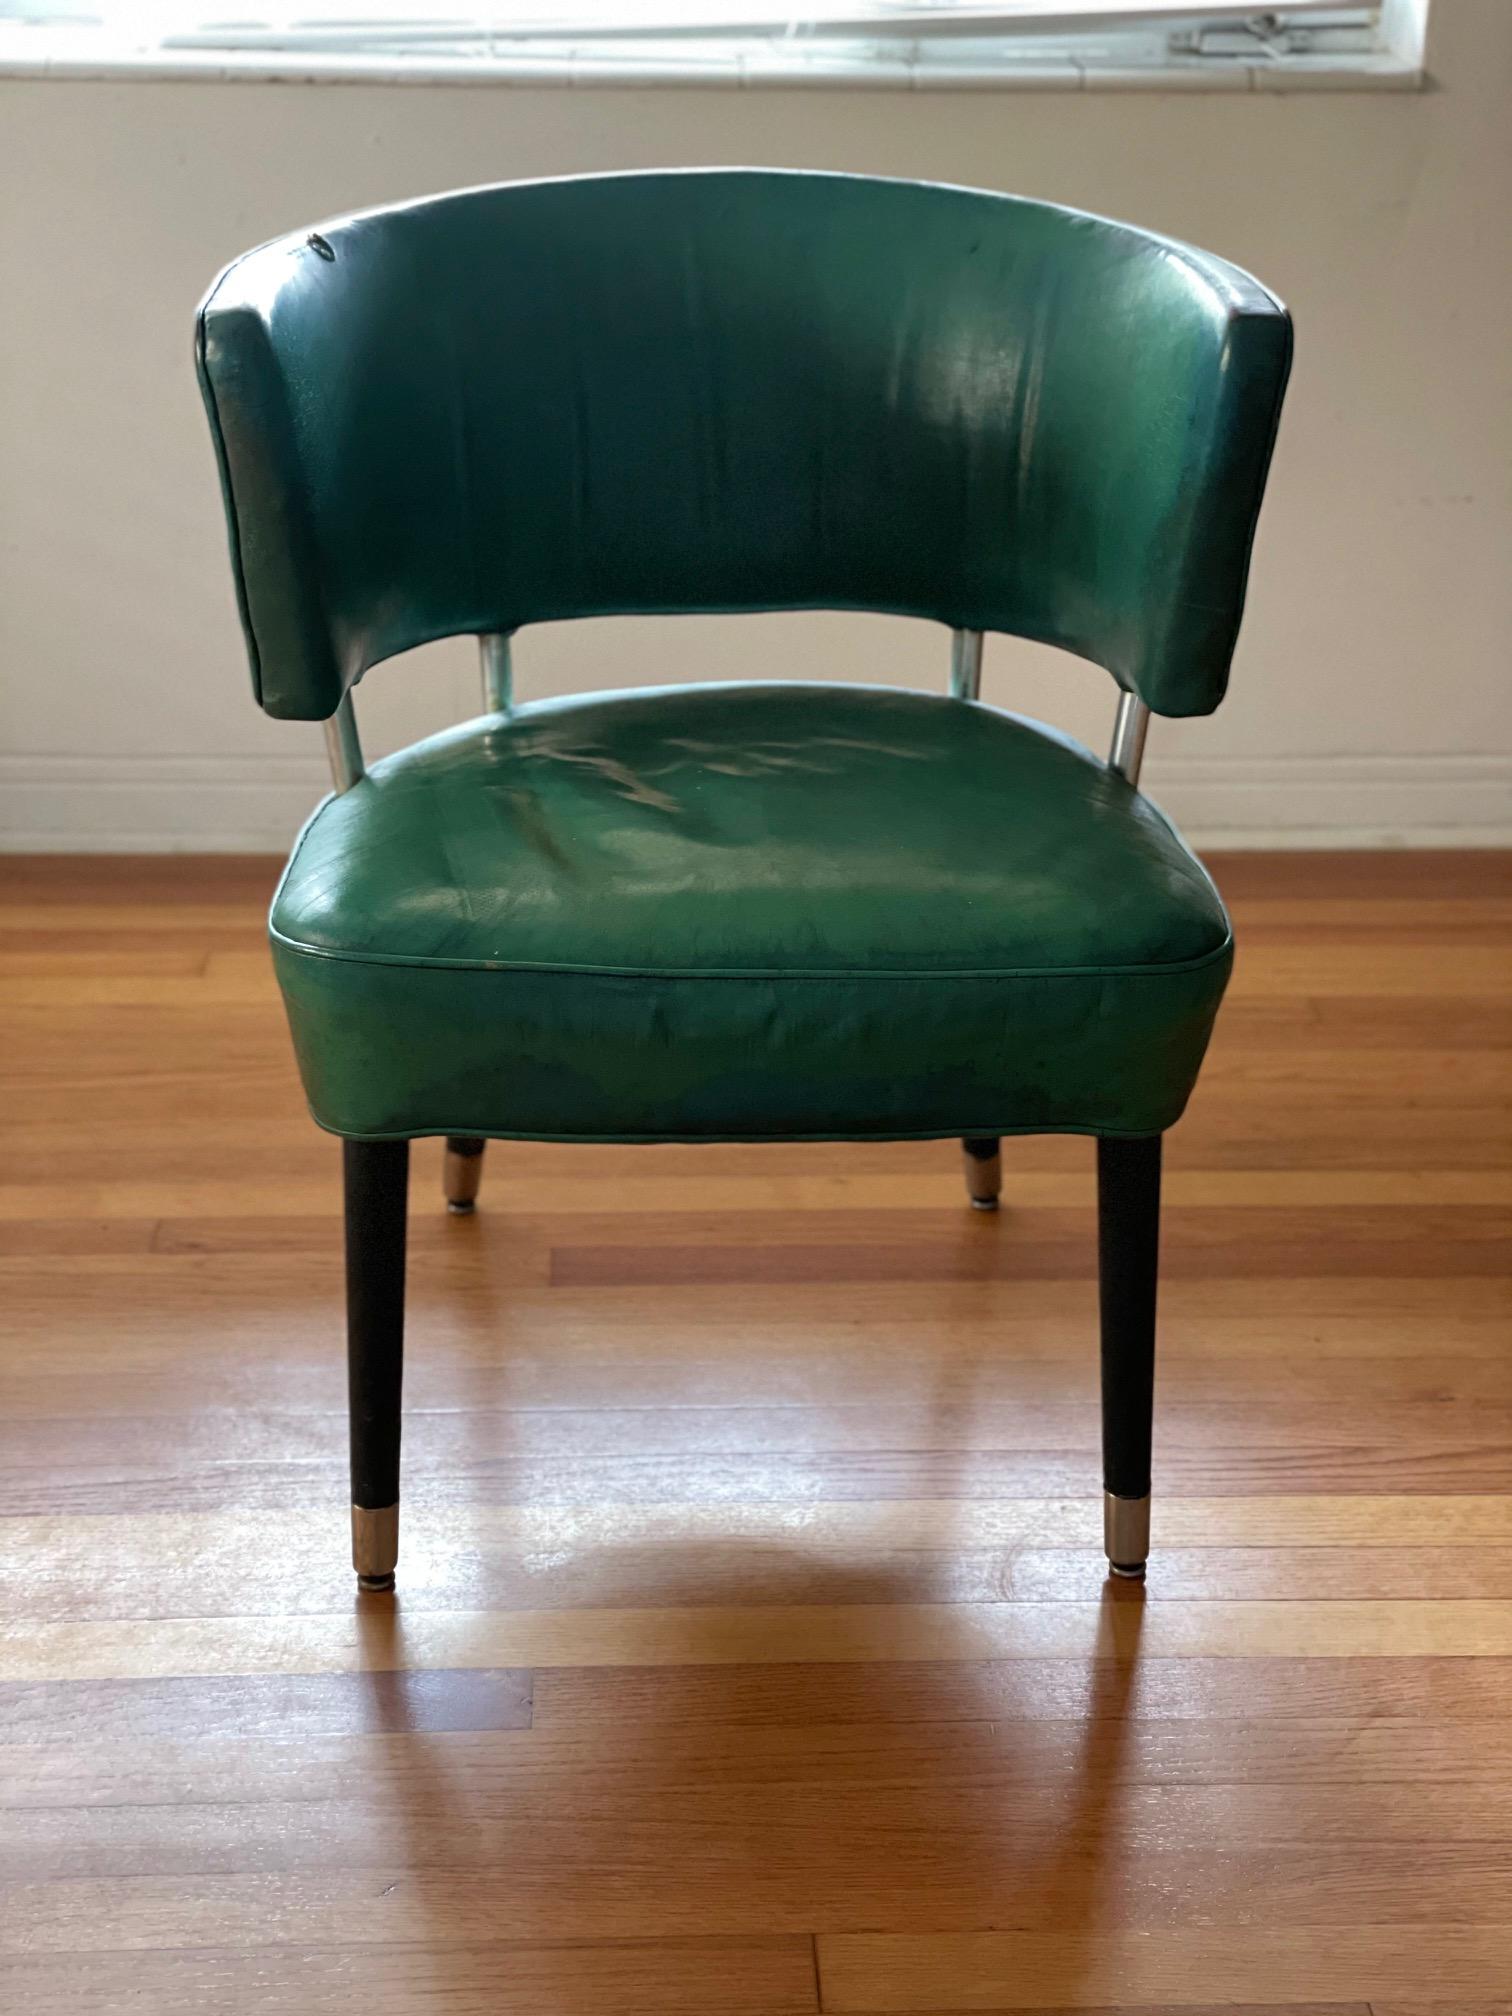 A rare curved back occasional chair from the famed ocean liner SS United States. Retaining original patent blue leather, aluminum legs covered in leather. Beautiful patina (note leather has a few tears) and historical rarity. 